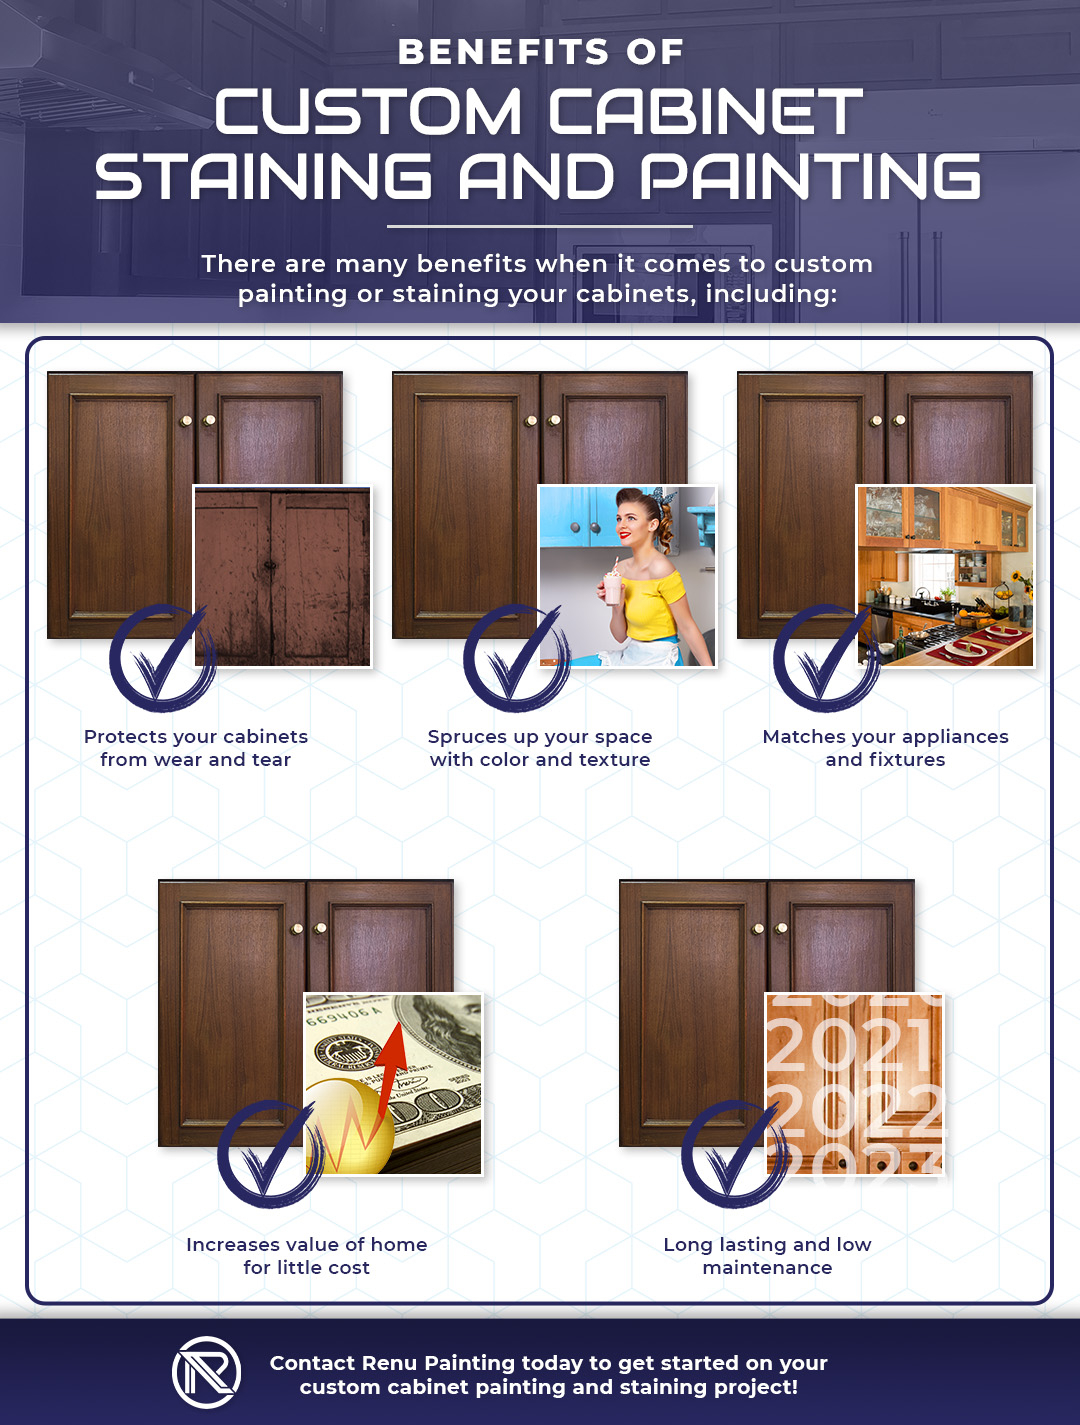 Benefits Of Custom Cabinet Staining and Painting.jpg